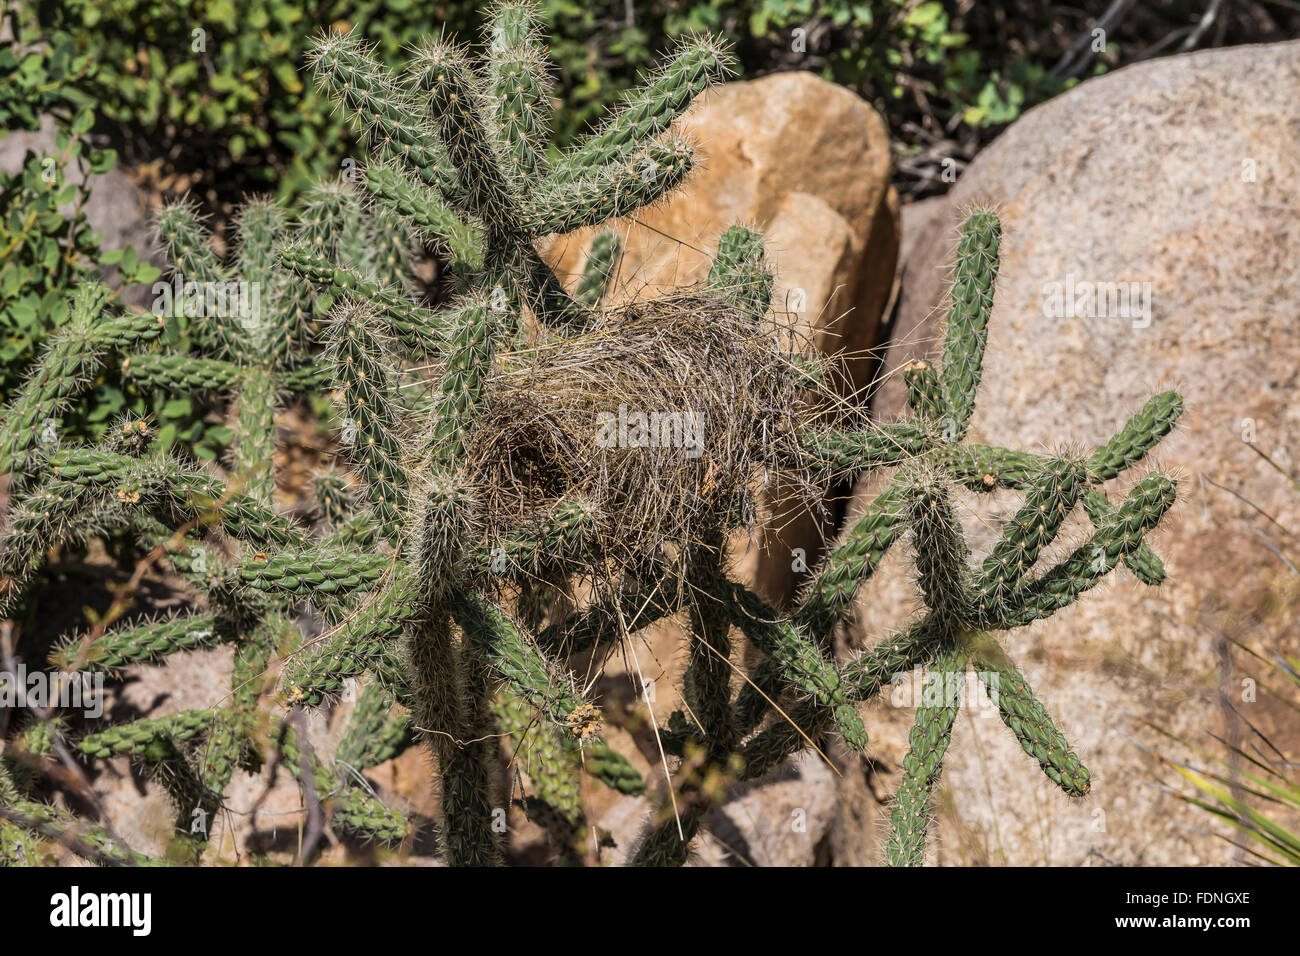 Cactus Wren, Campylorhynchus brunneicapillus, nest in a Cholla cactus in the Organ Mountains, New Mexico, USA Stock Photo